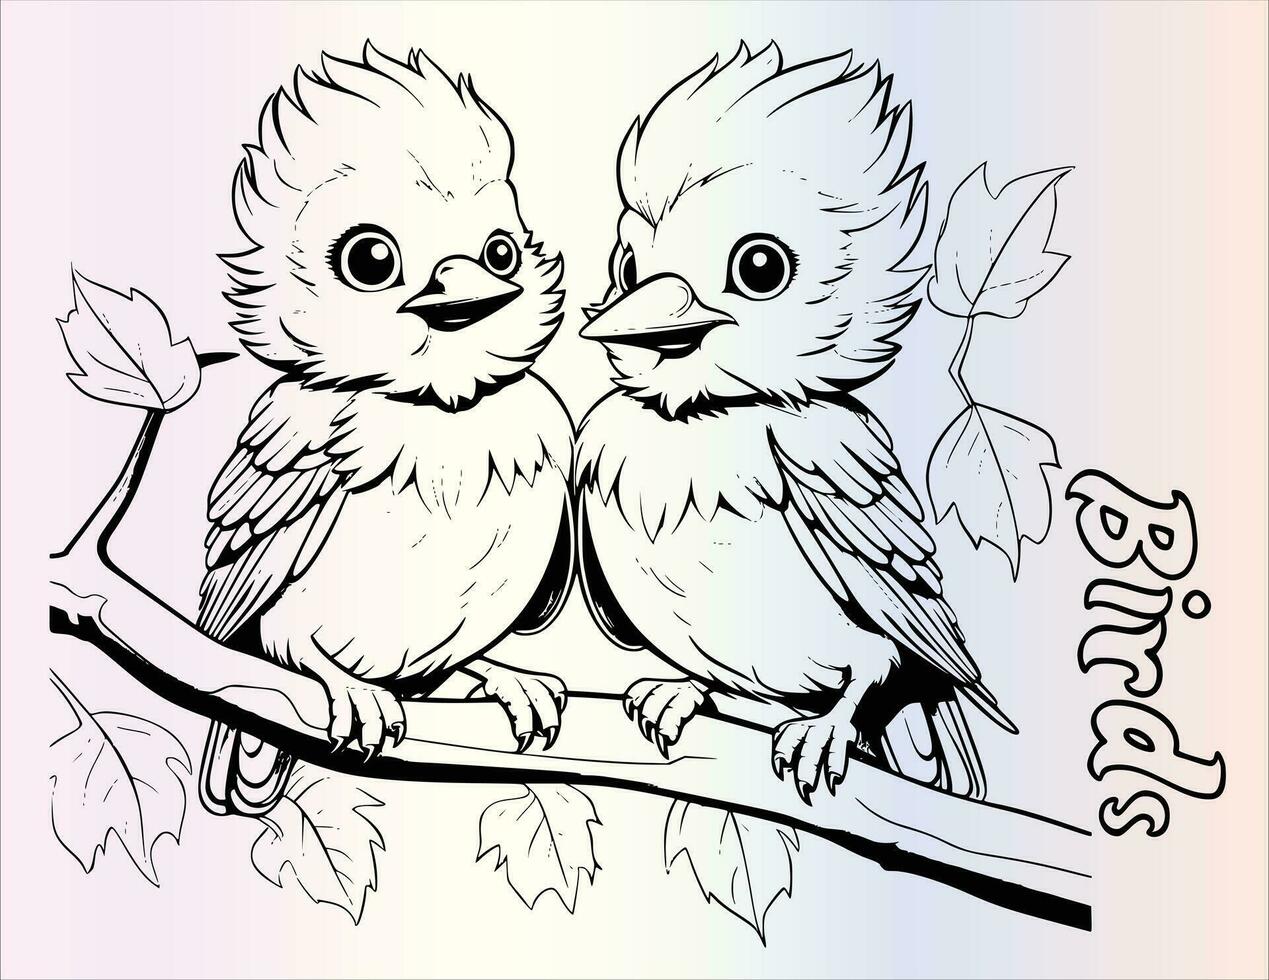 Cute Birds Holding Autumn Leaves Coloring Page for Kids vector